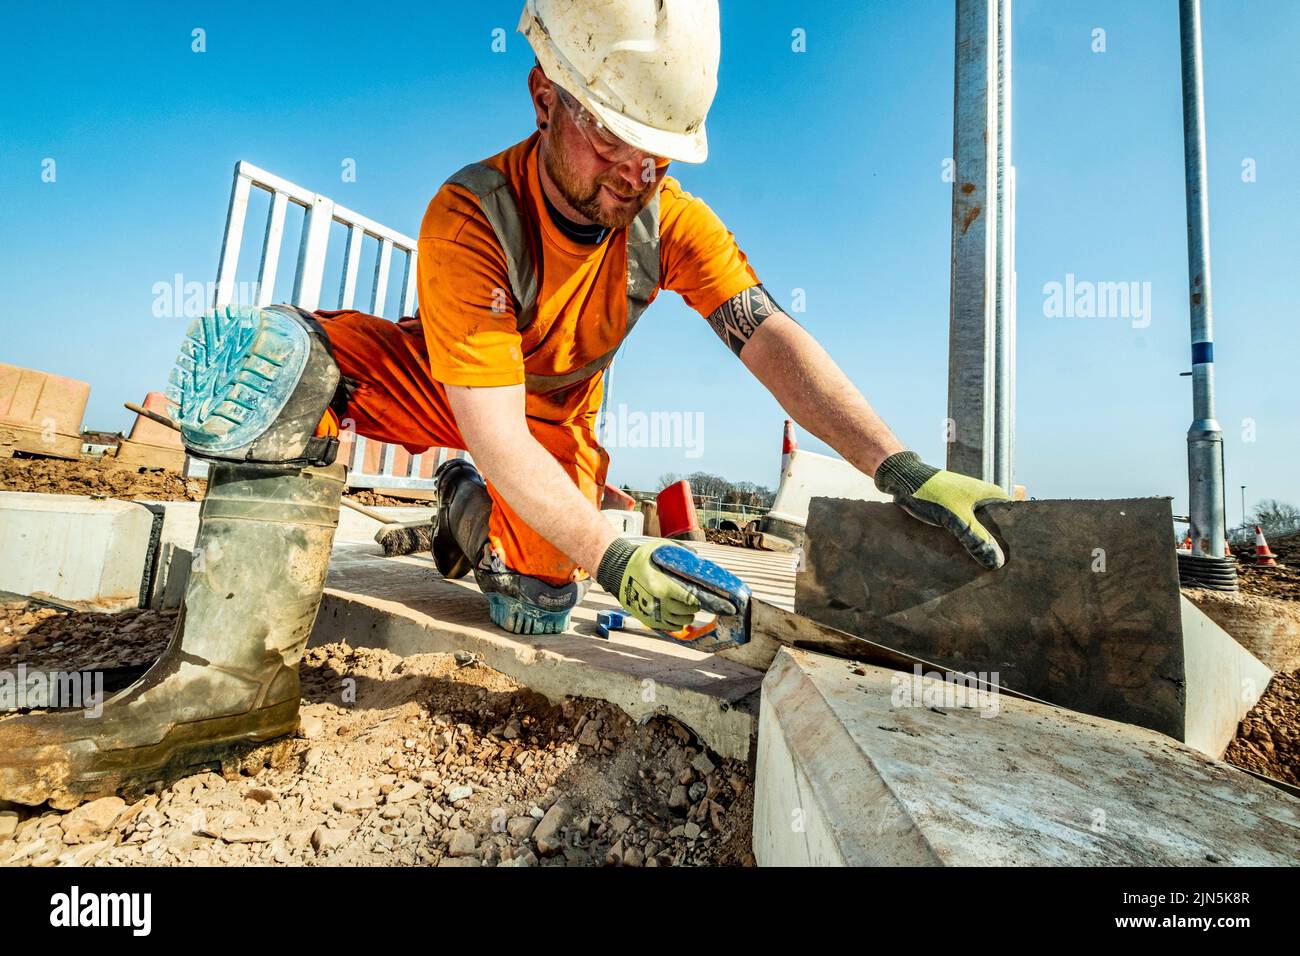 Railway workers building new railway and knocking down bridges Stock Photo